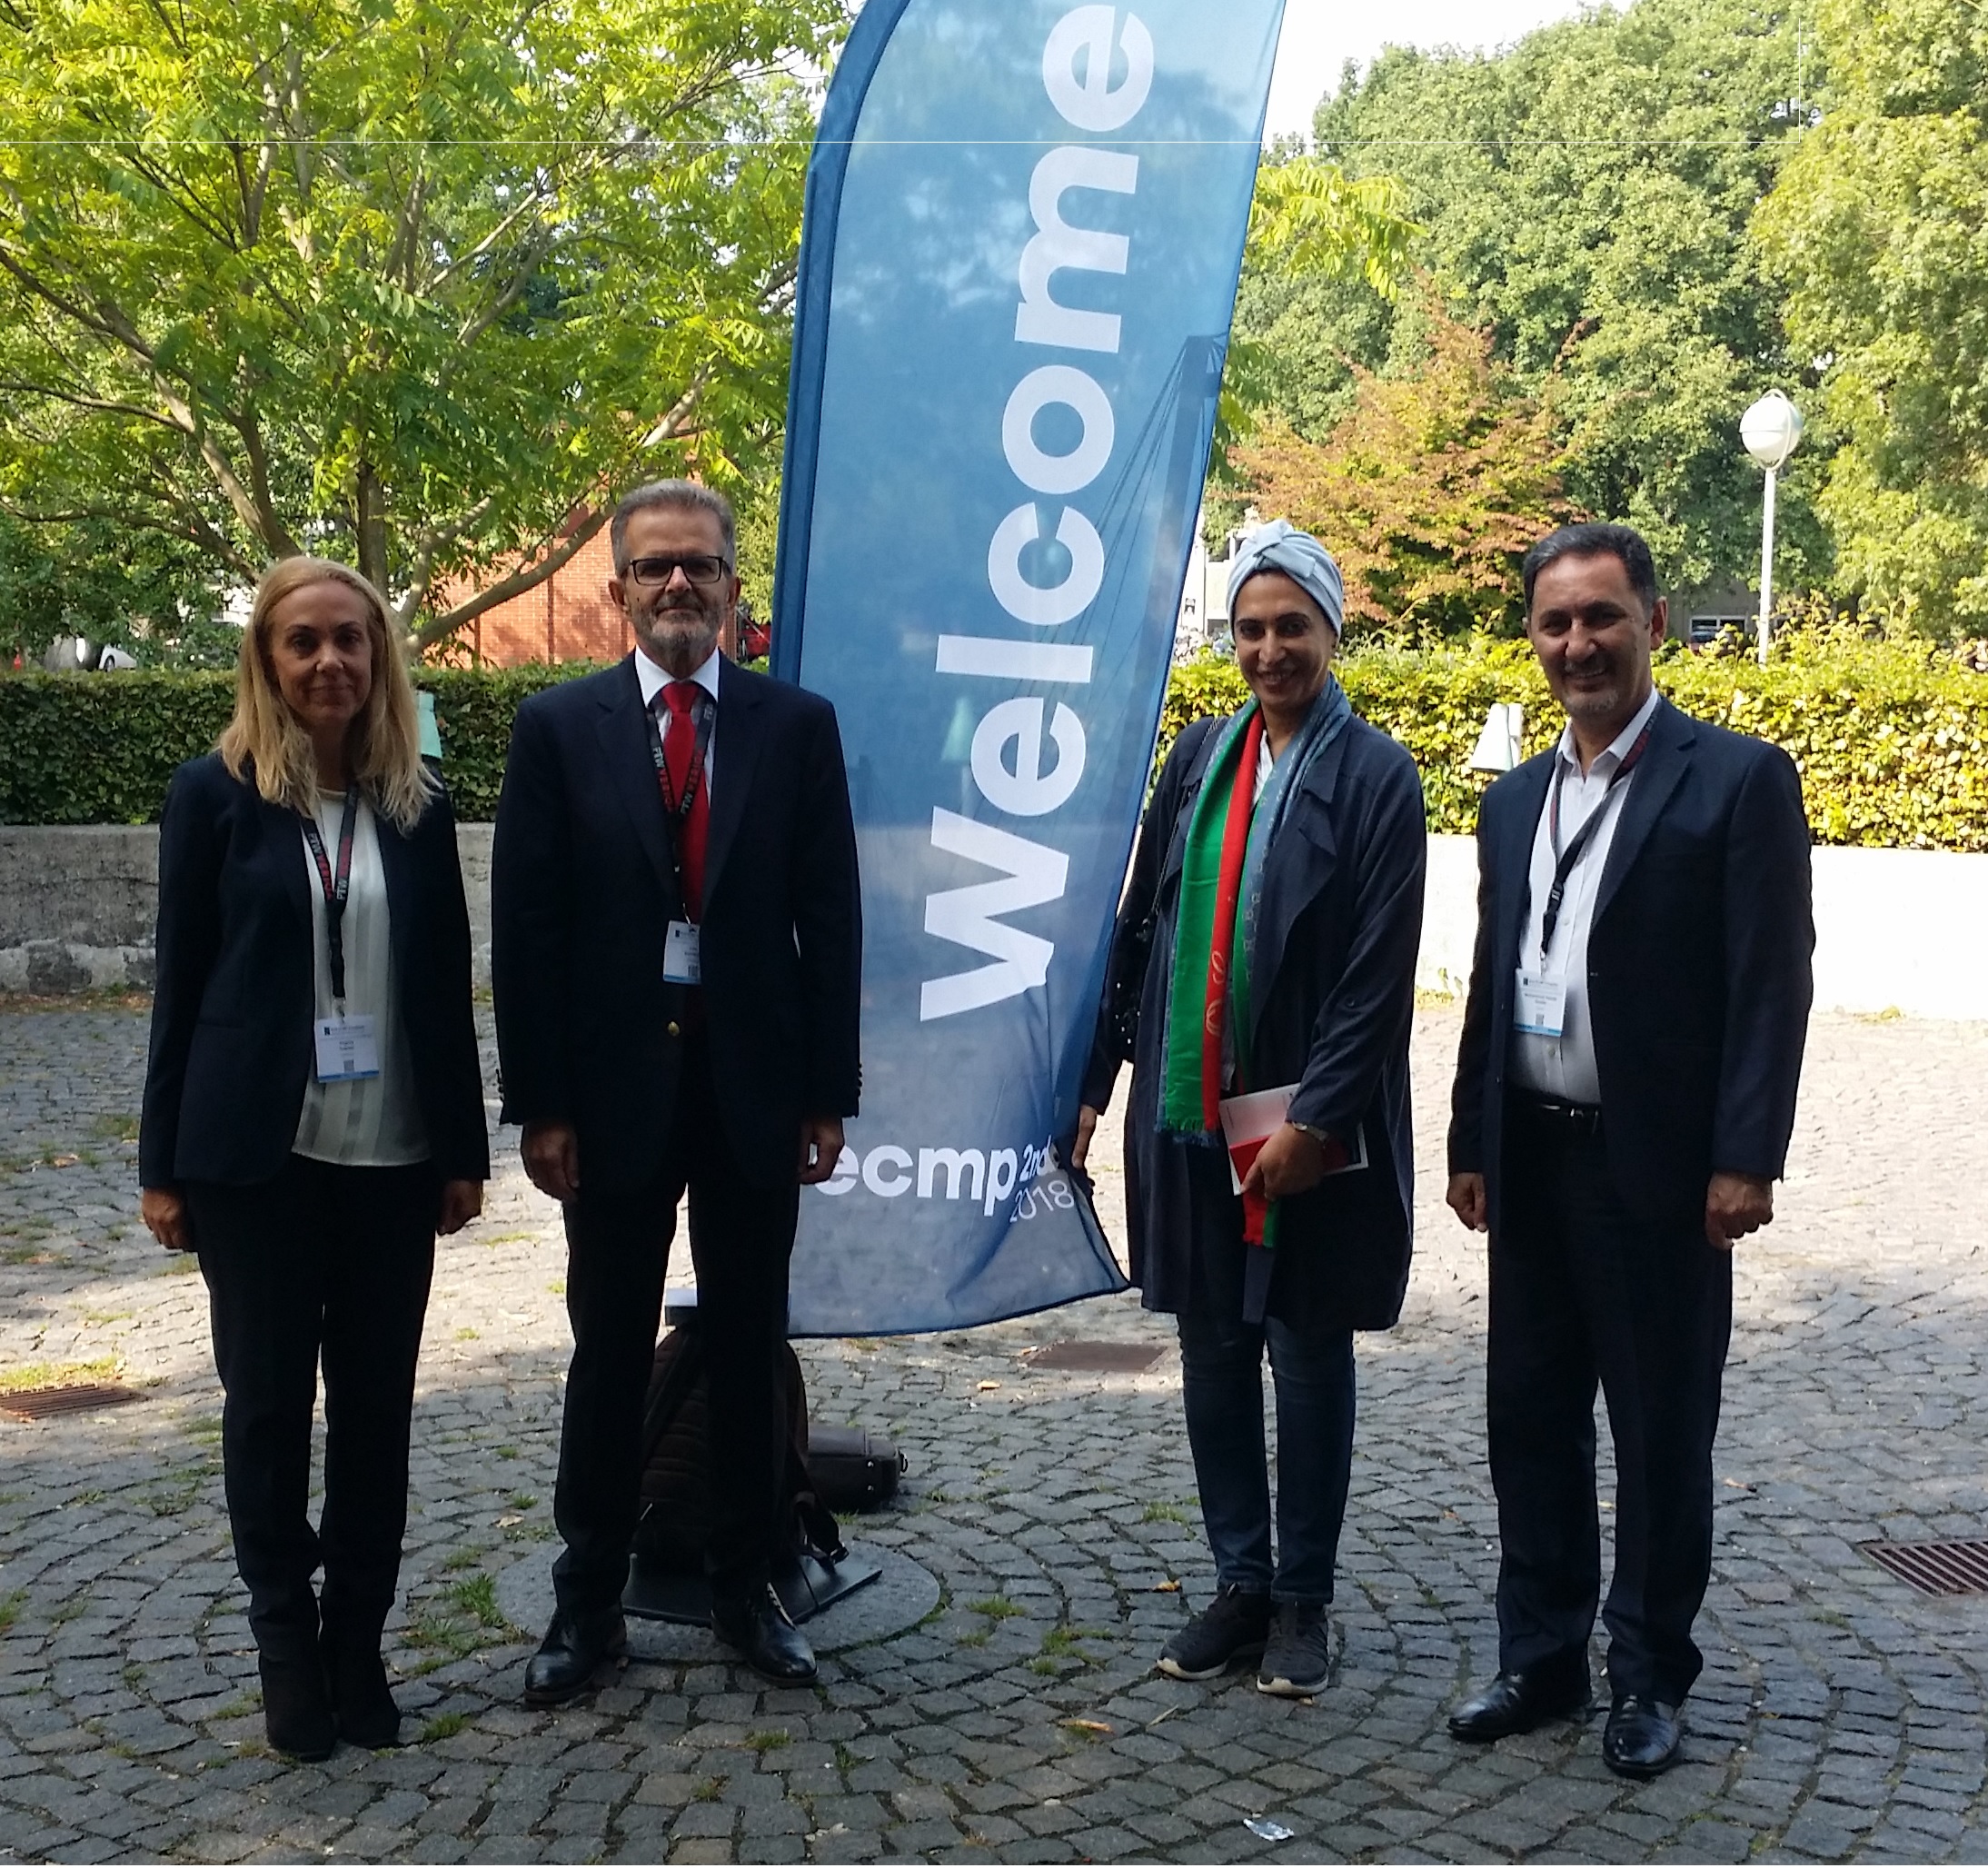 Meeting between IOMP, MEFOMP and EFOMP during the European Conference on Medical Physics (ECMP 2018)